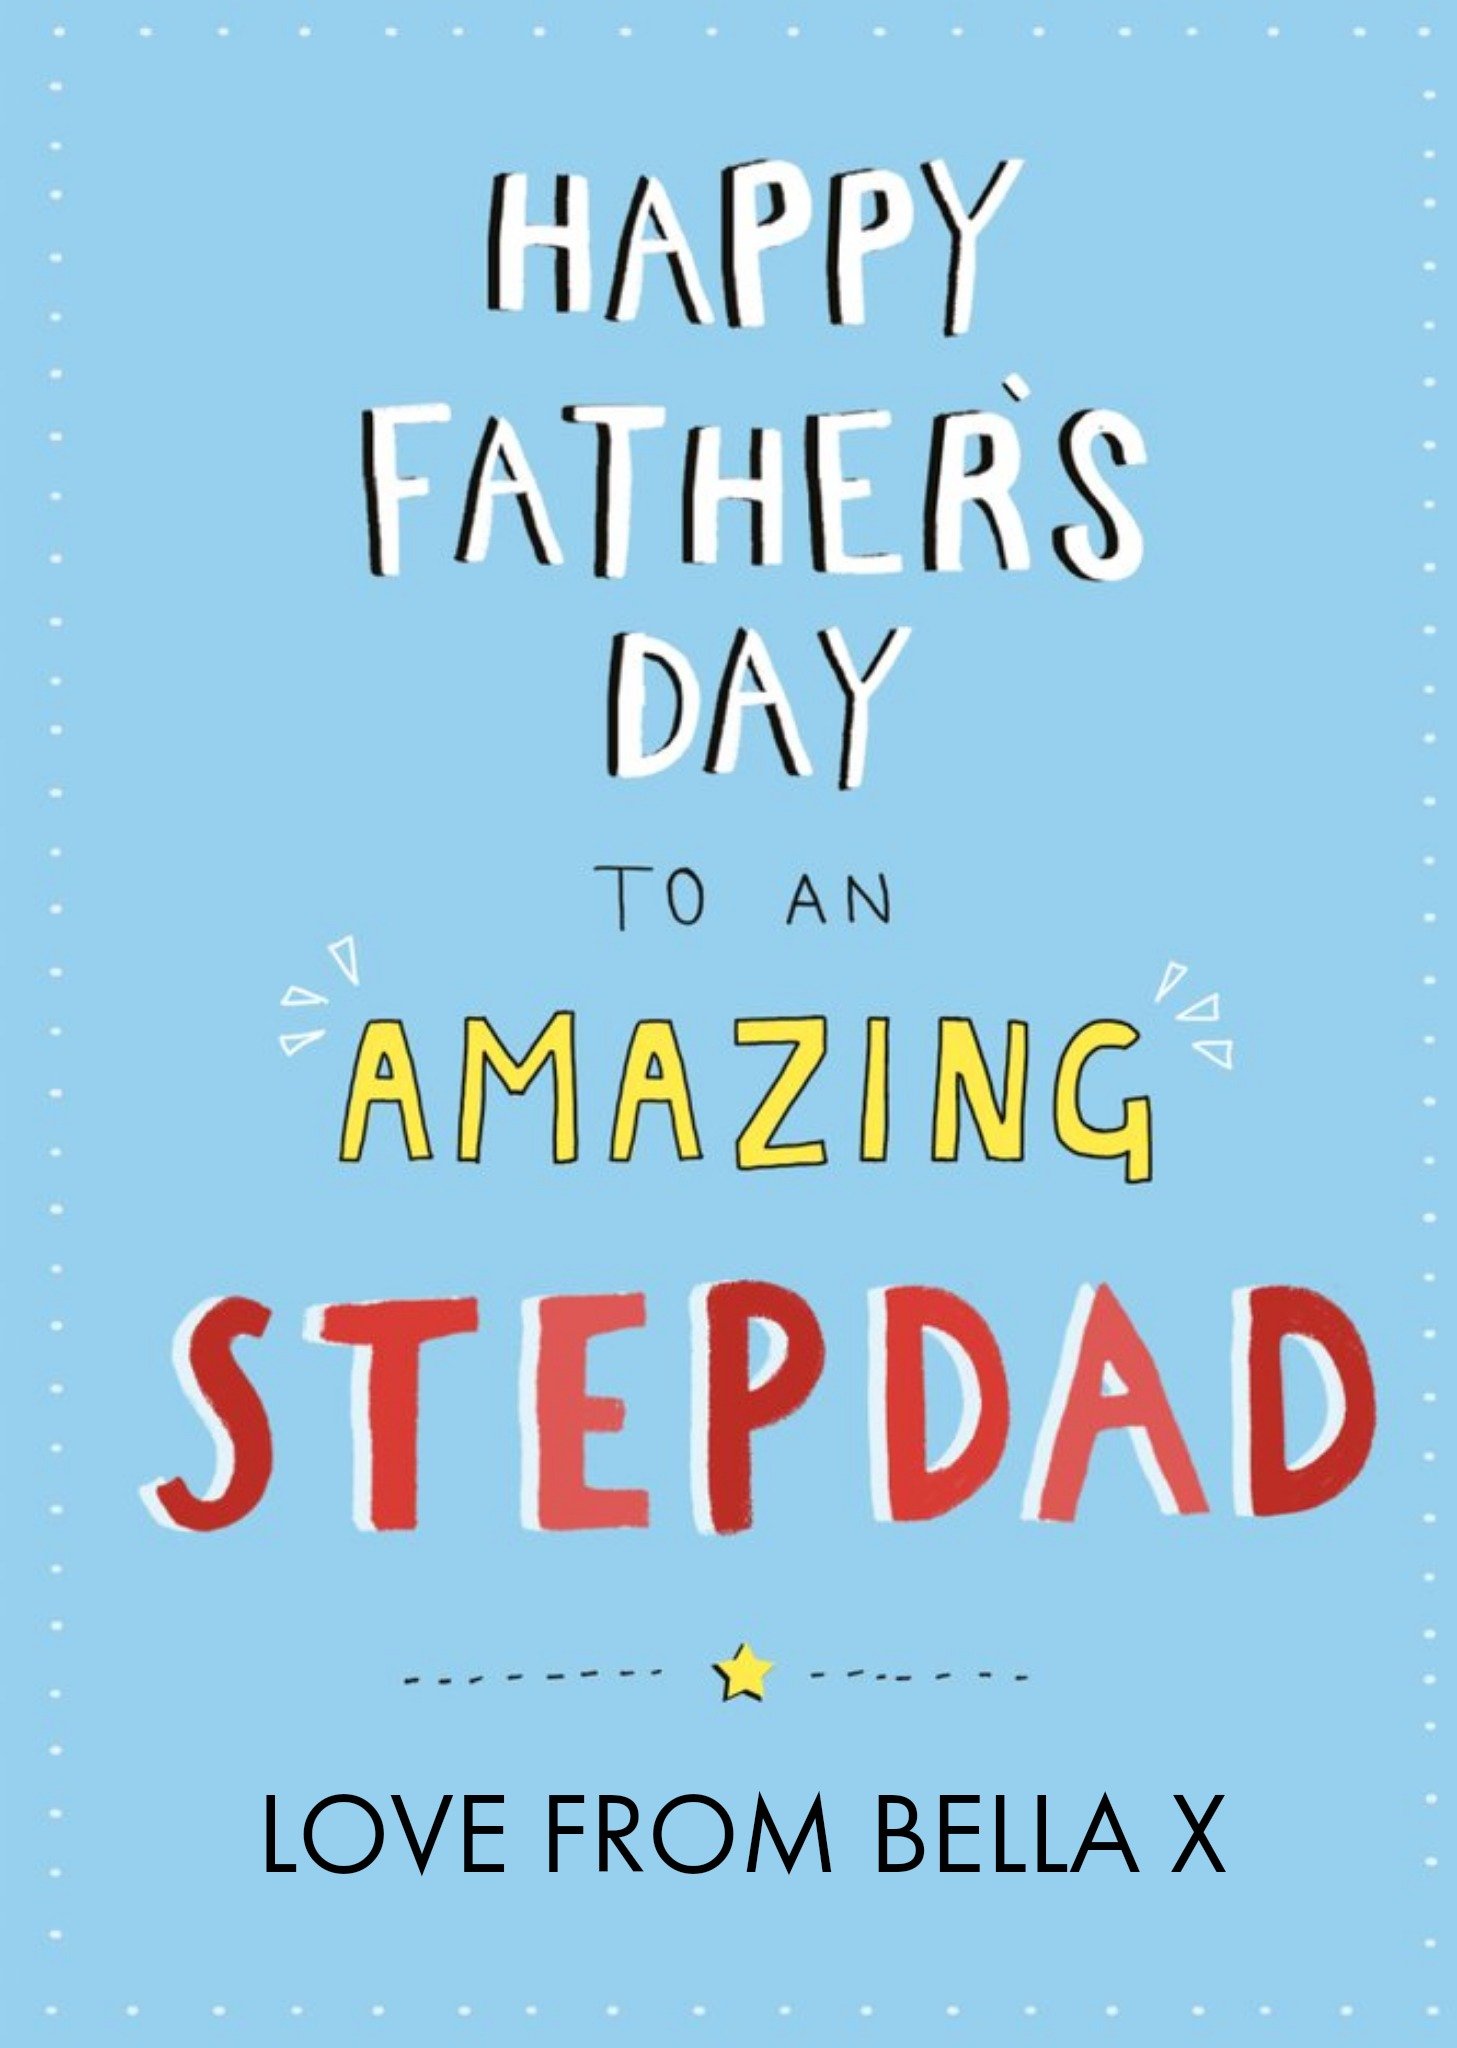 Moonpig Typographic Happy Fathers Day To An Amazing Stepdad Card, Large